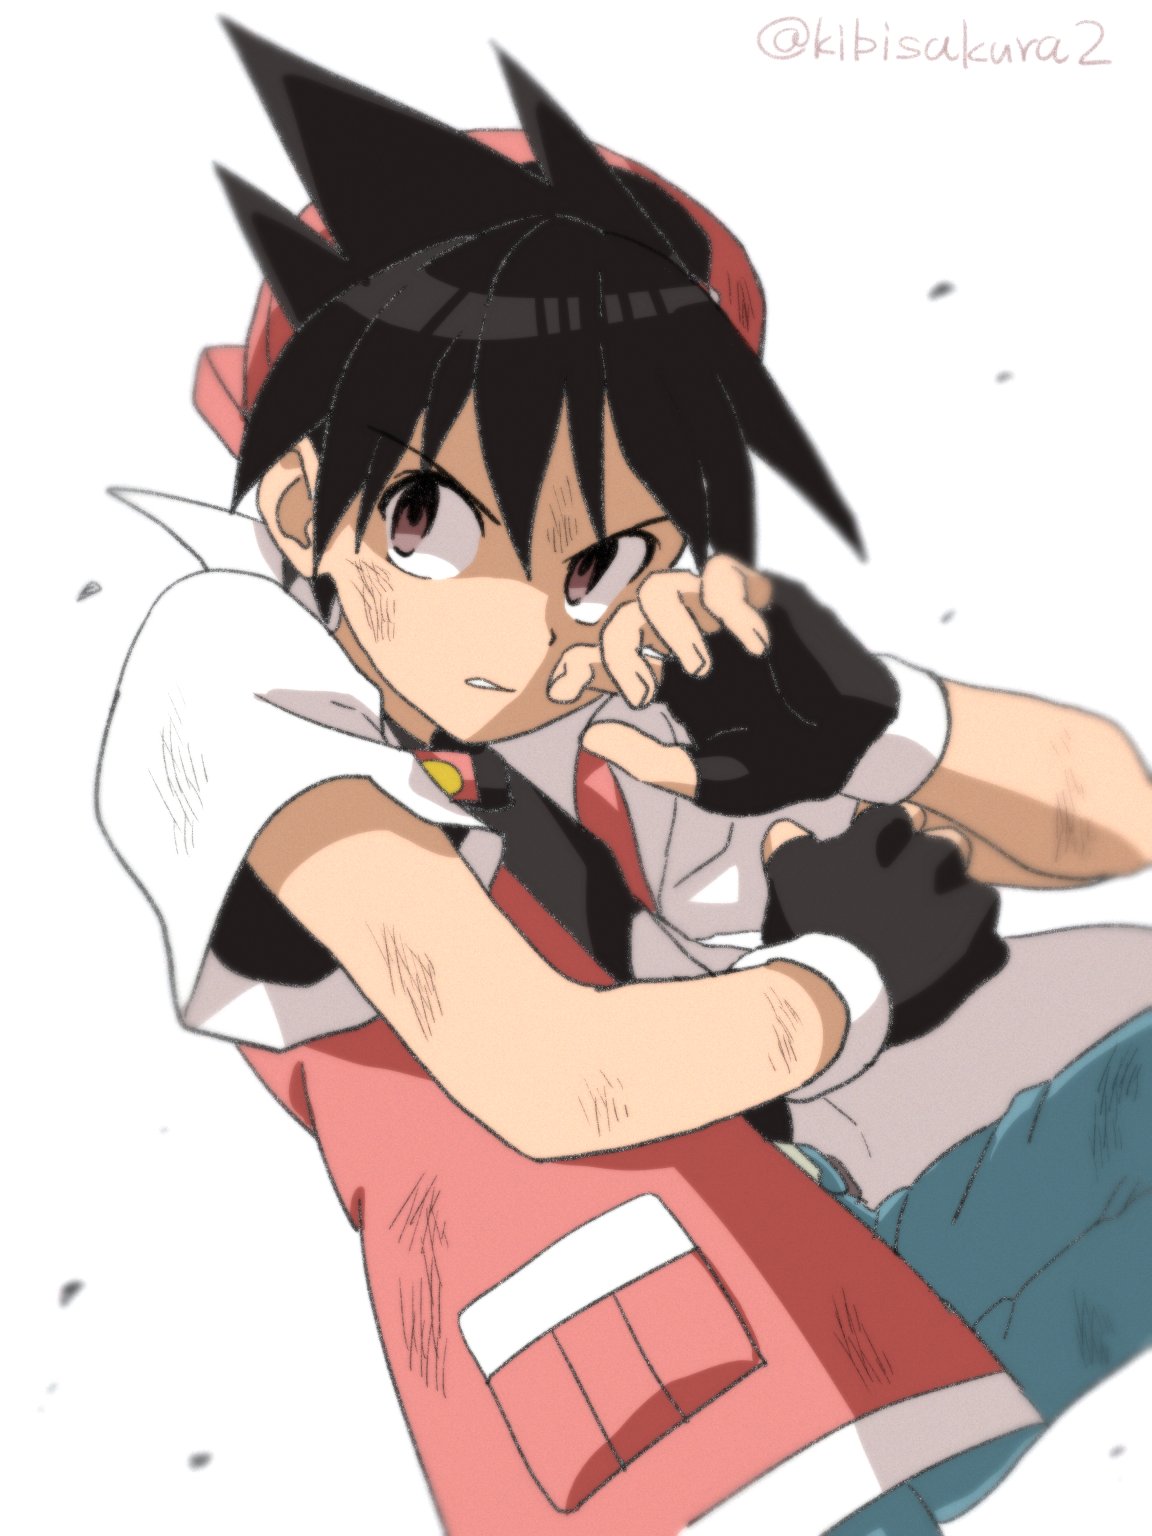 1boy backwards_hat bangs baseball_cap black_hair blurry brown_eyes dirty dirty_clothes dirty_face fingerless_gloves gloves hair_between_eyes hat highres jacket kibisakura2 leg_up looking_to_the_side male_focus pants parted_lips pokemon pokemon_adventures red_(pokemon) shirt solo twitter_username white_background